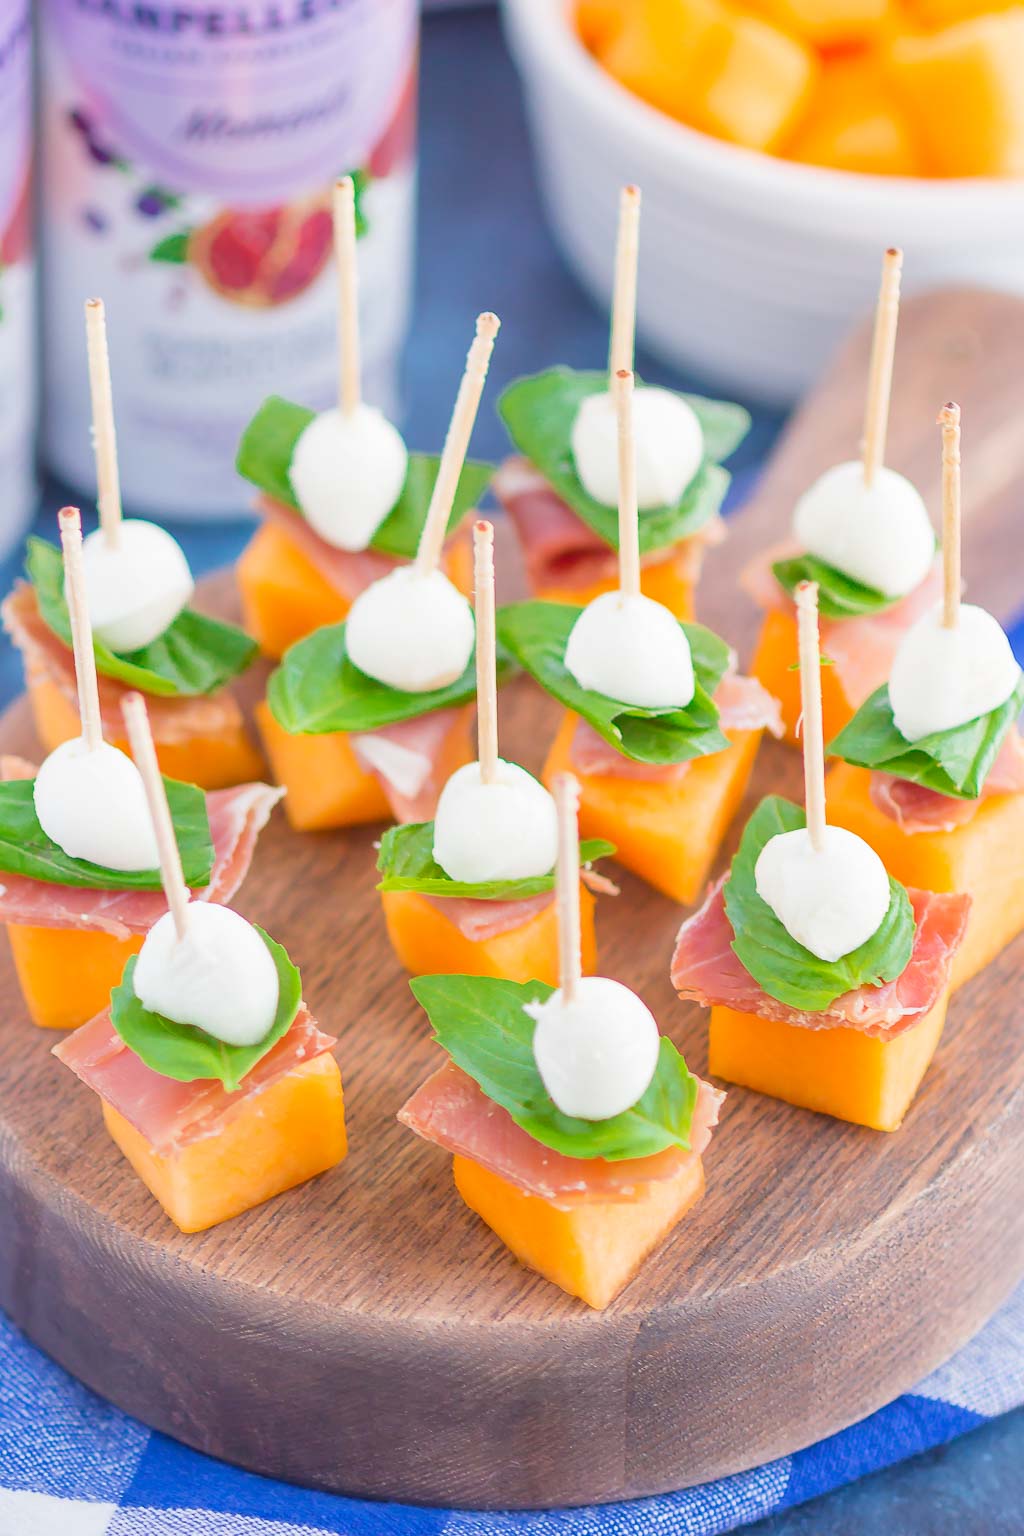 Prosciutto Melon Bites are a simple, sweet and salty appetizer that's perfect for any time. Salty prosciutto and sweet melon are paired with fresh mozzarella and basil to create a match made in food heaven. Easy to make and ready in no time, everyone will love these tasty bites! #prosciuttobites #melonbites #prosciuttomelon #prosciuttoappetizer